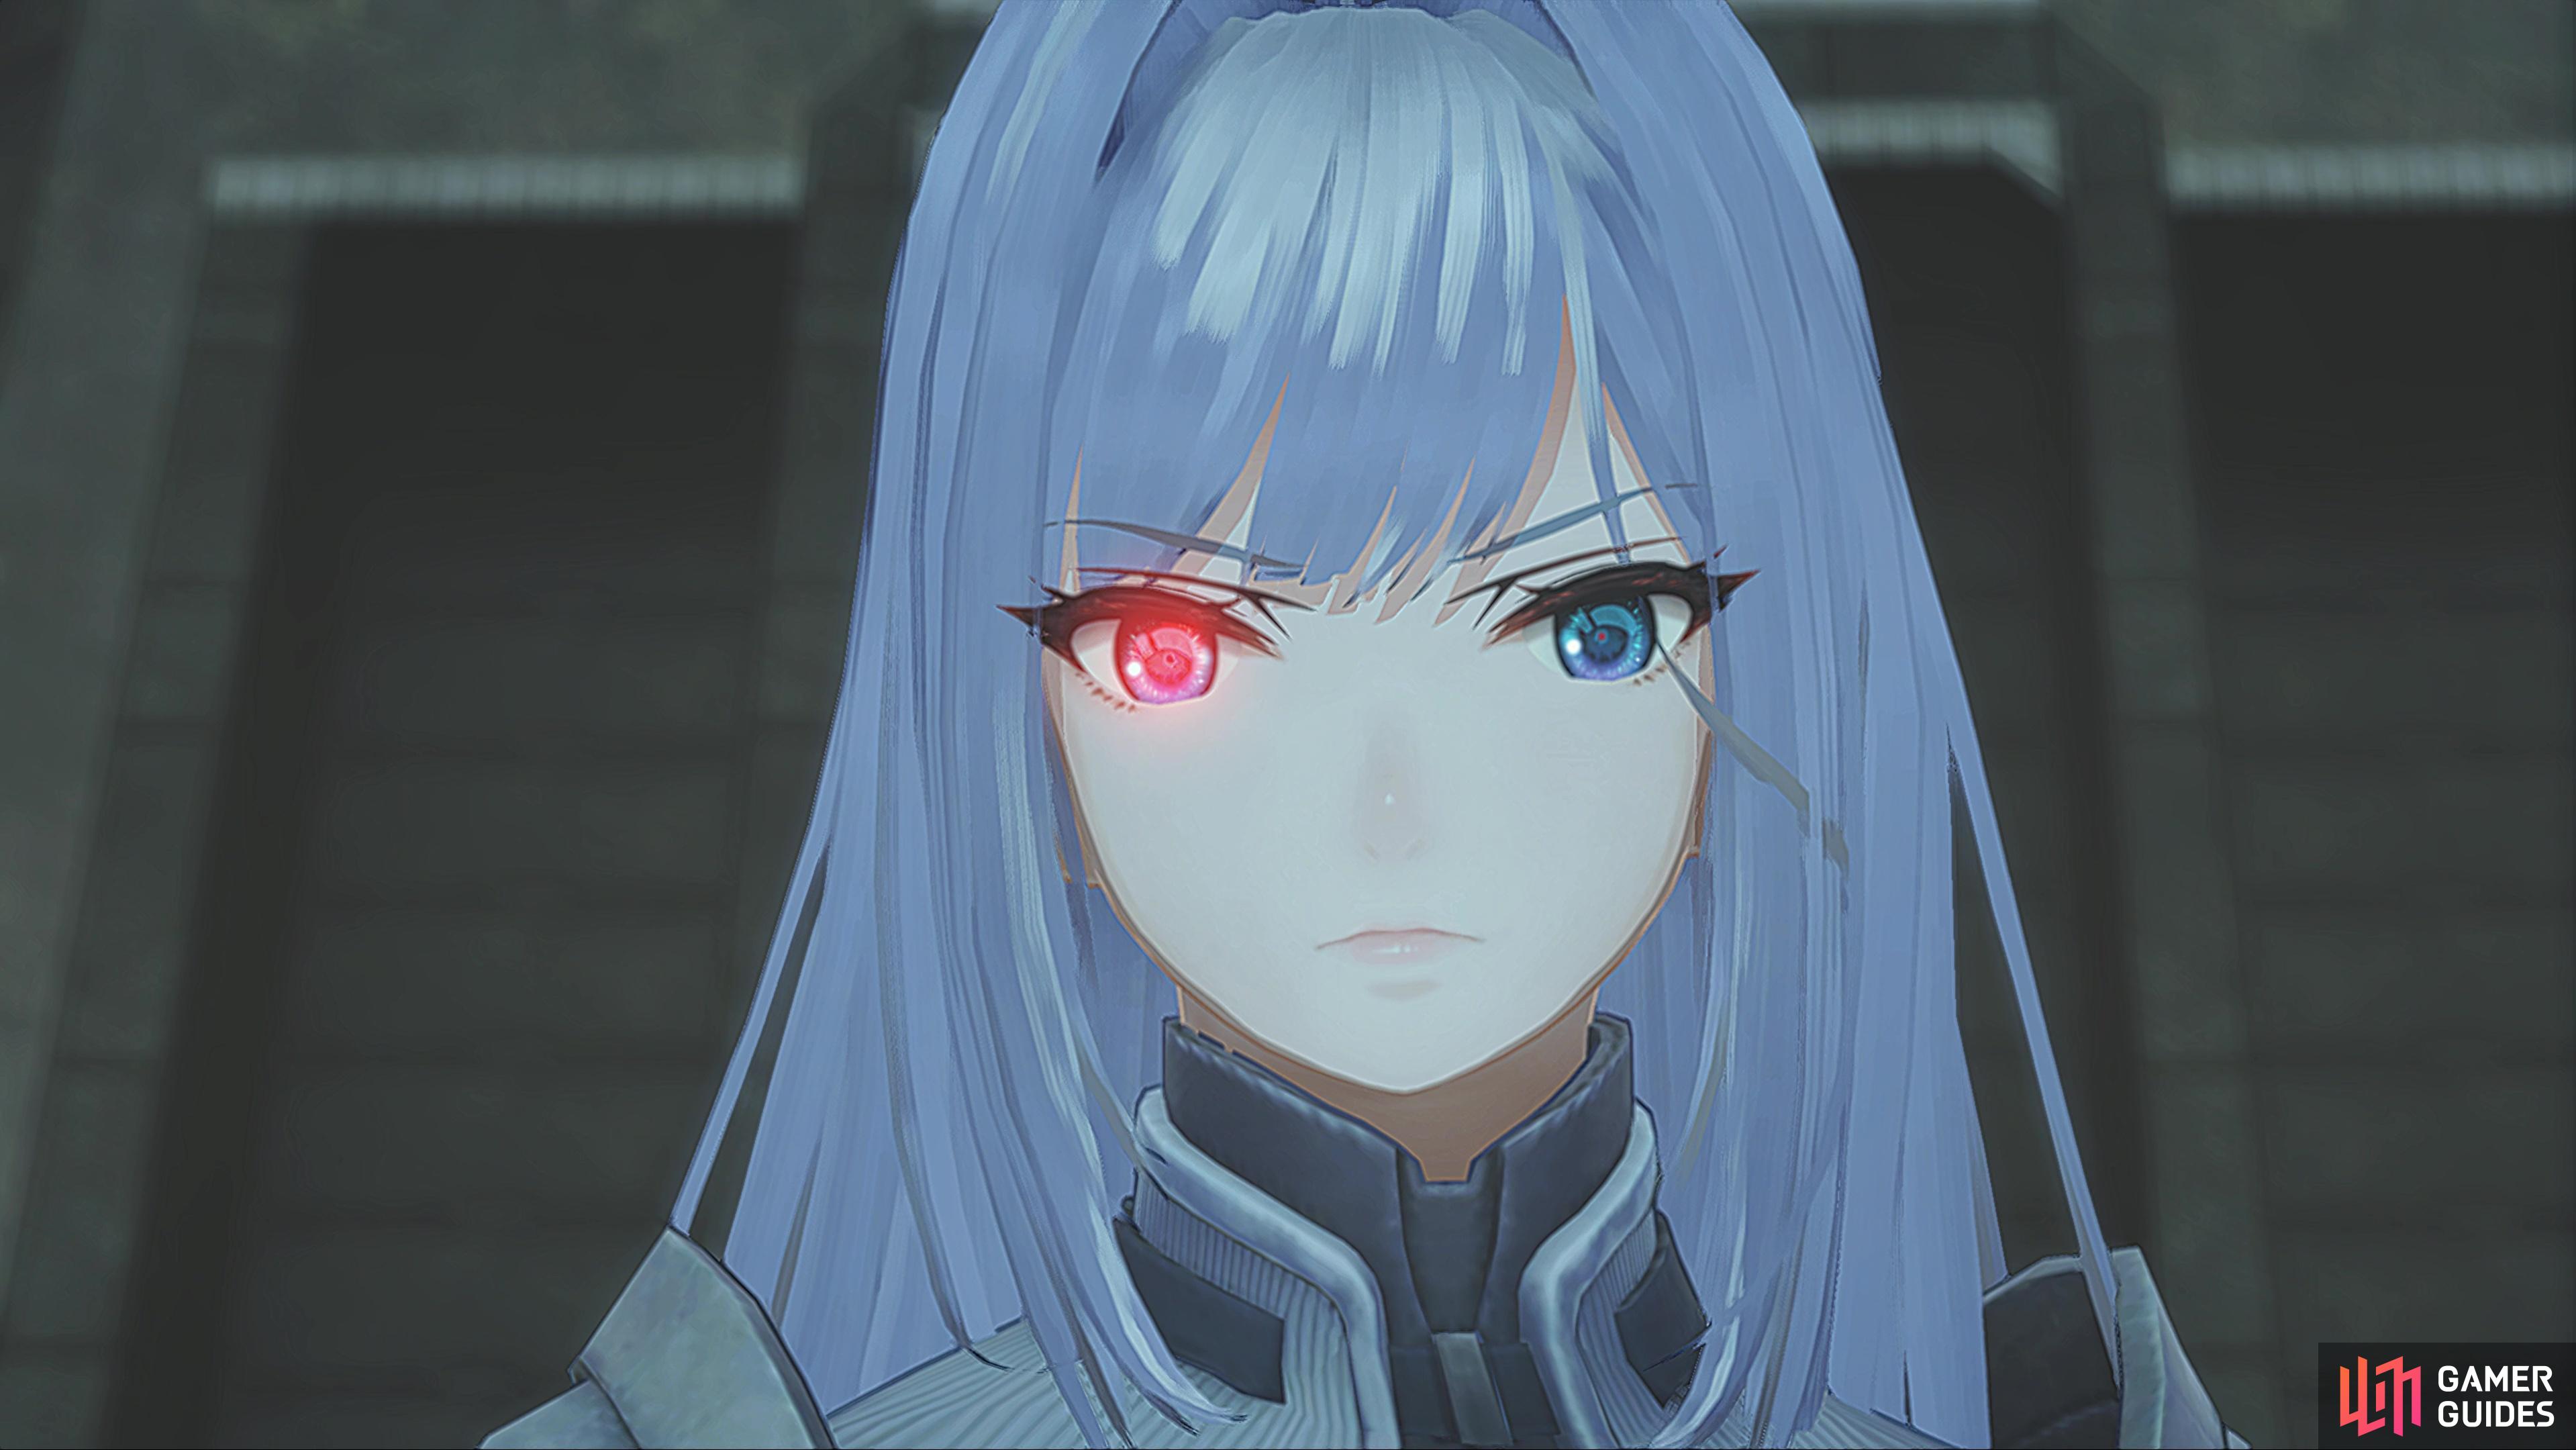 Silvercoat Ethel is a boss in Chapter 2 of Xenoblade Chronicles 3.